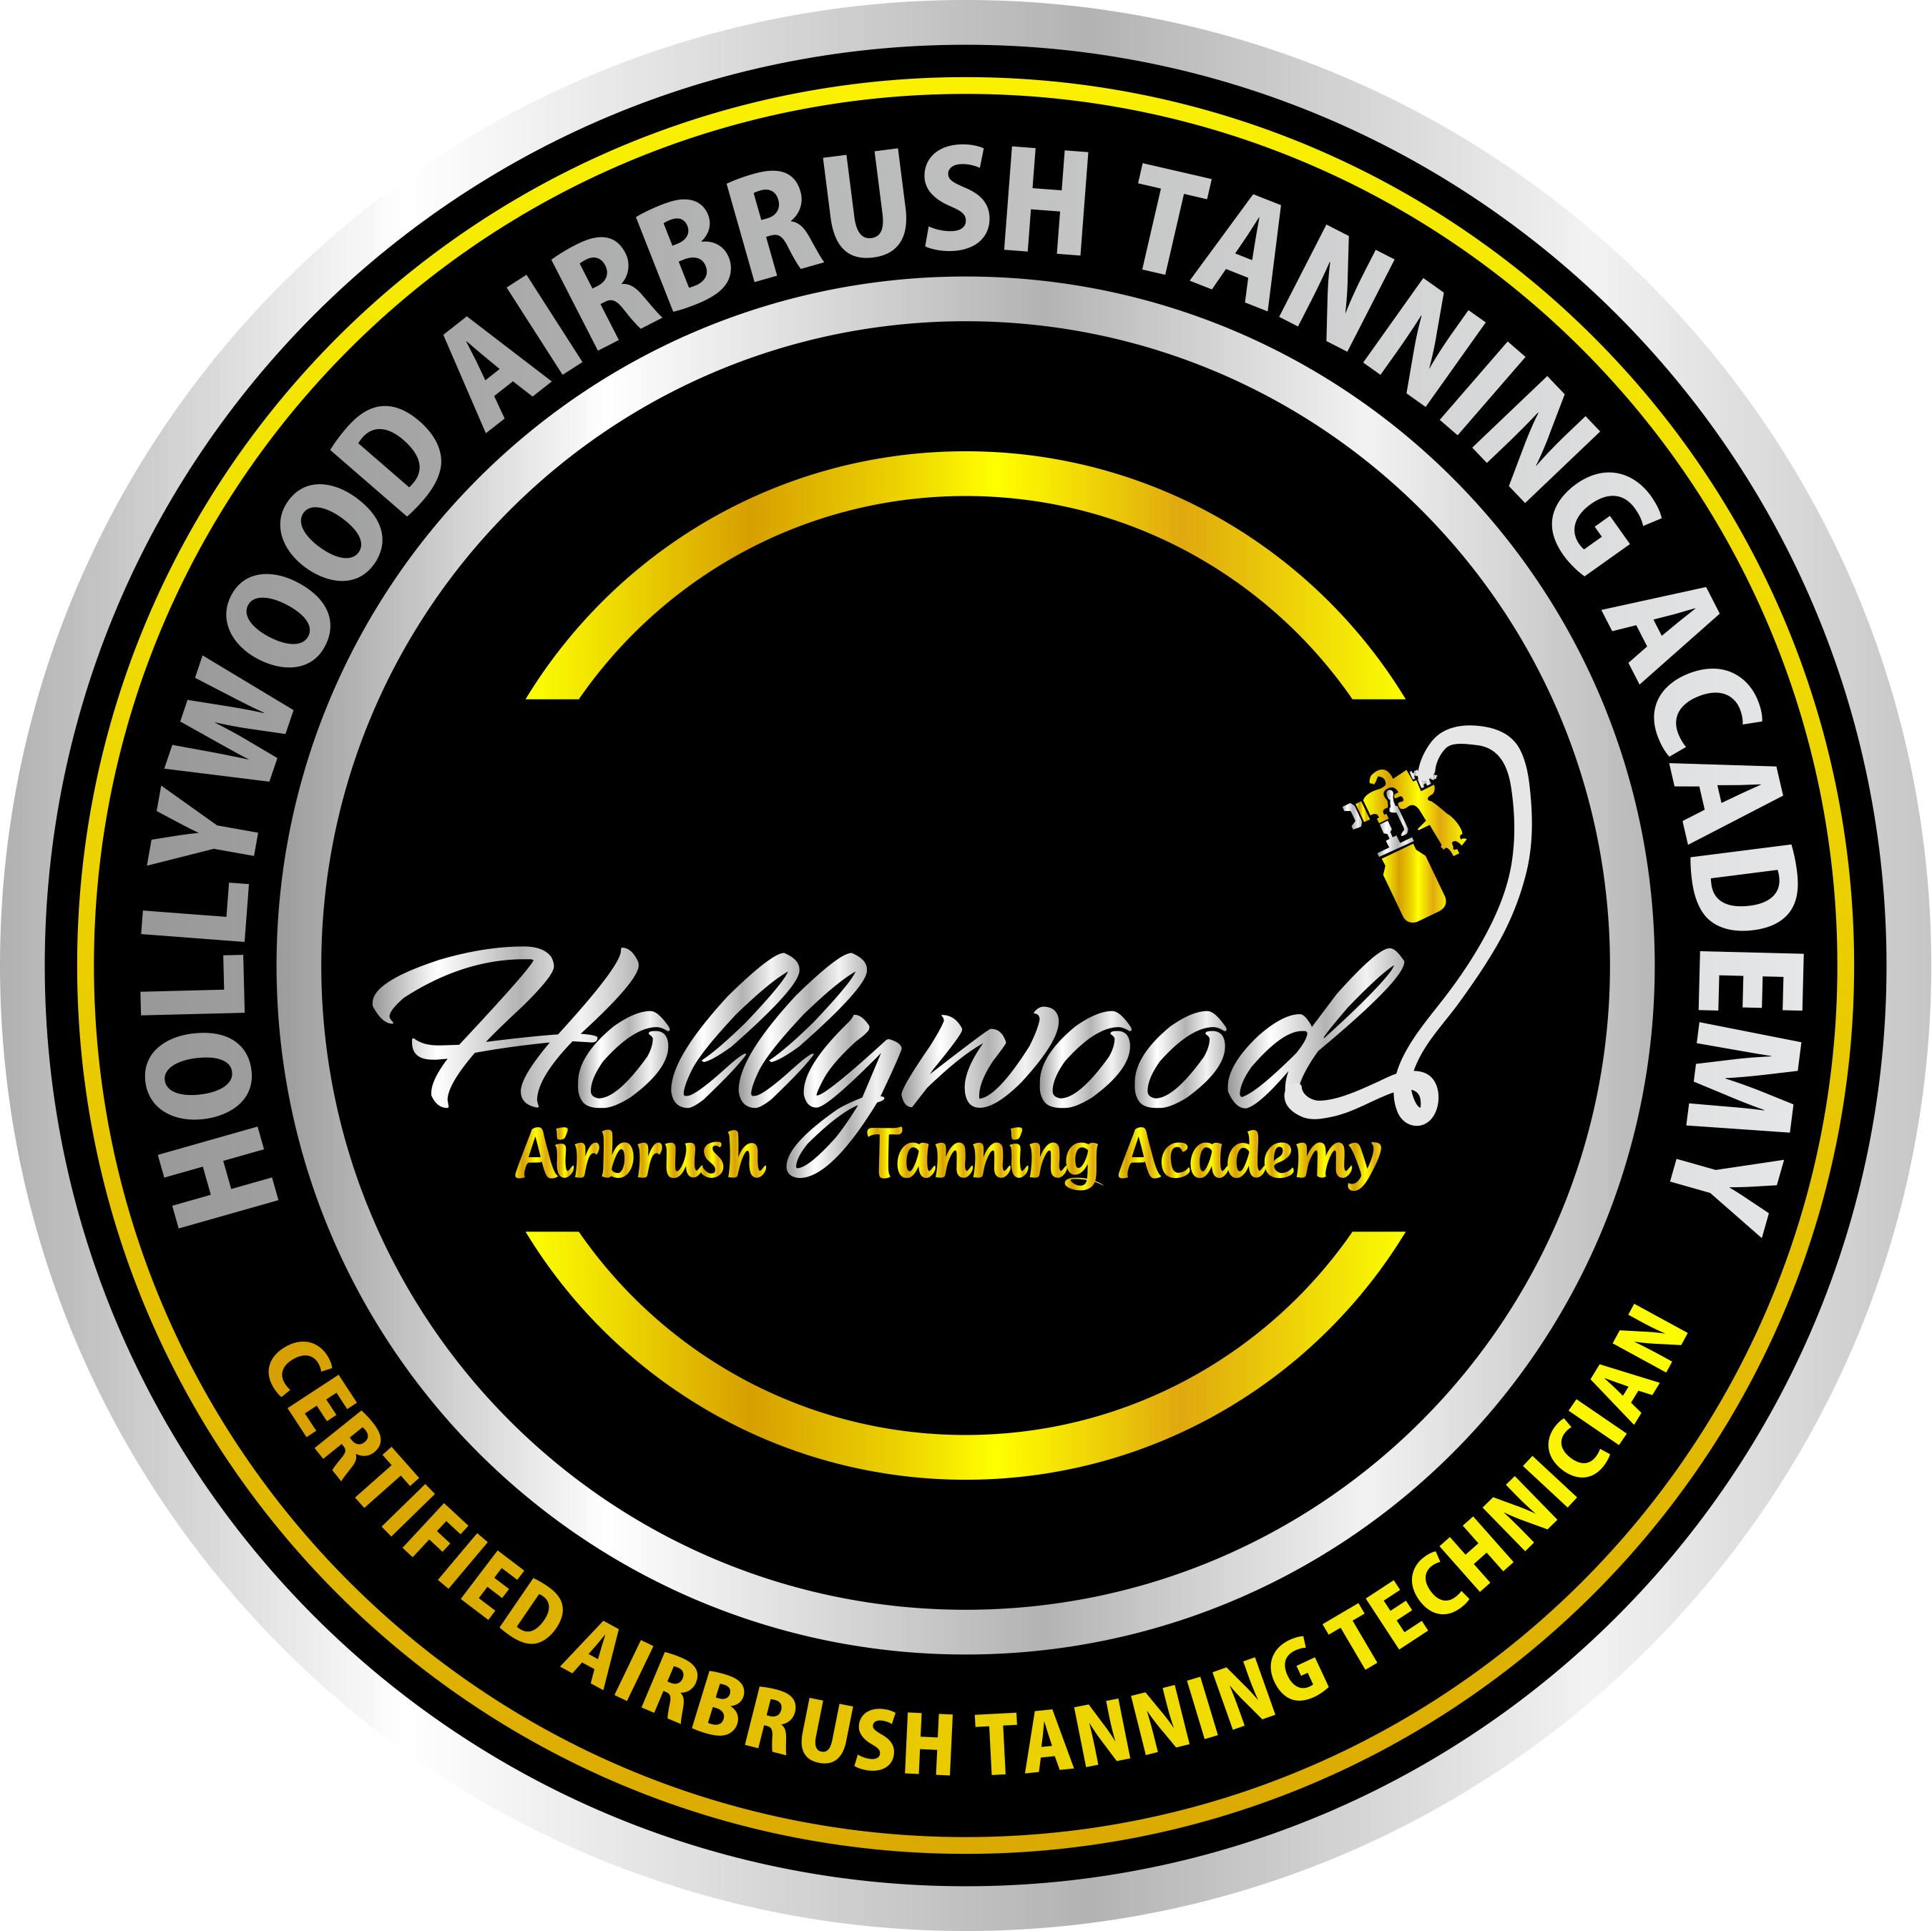 Hollywood Airbrush Tanning Academy Announces Hands-On Airbrush Tanning Class in Tinton Falls, New Jersey on August 2014